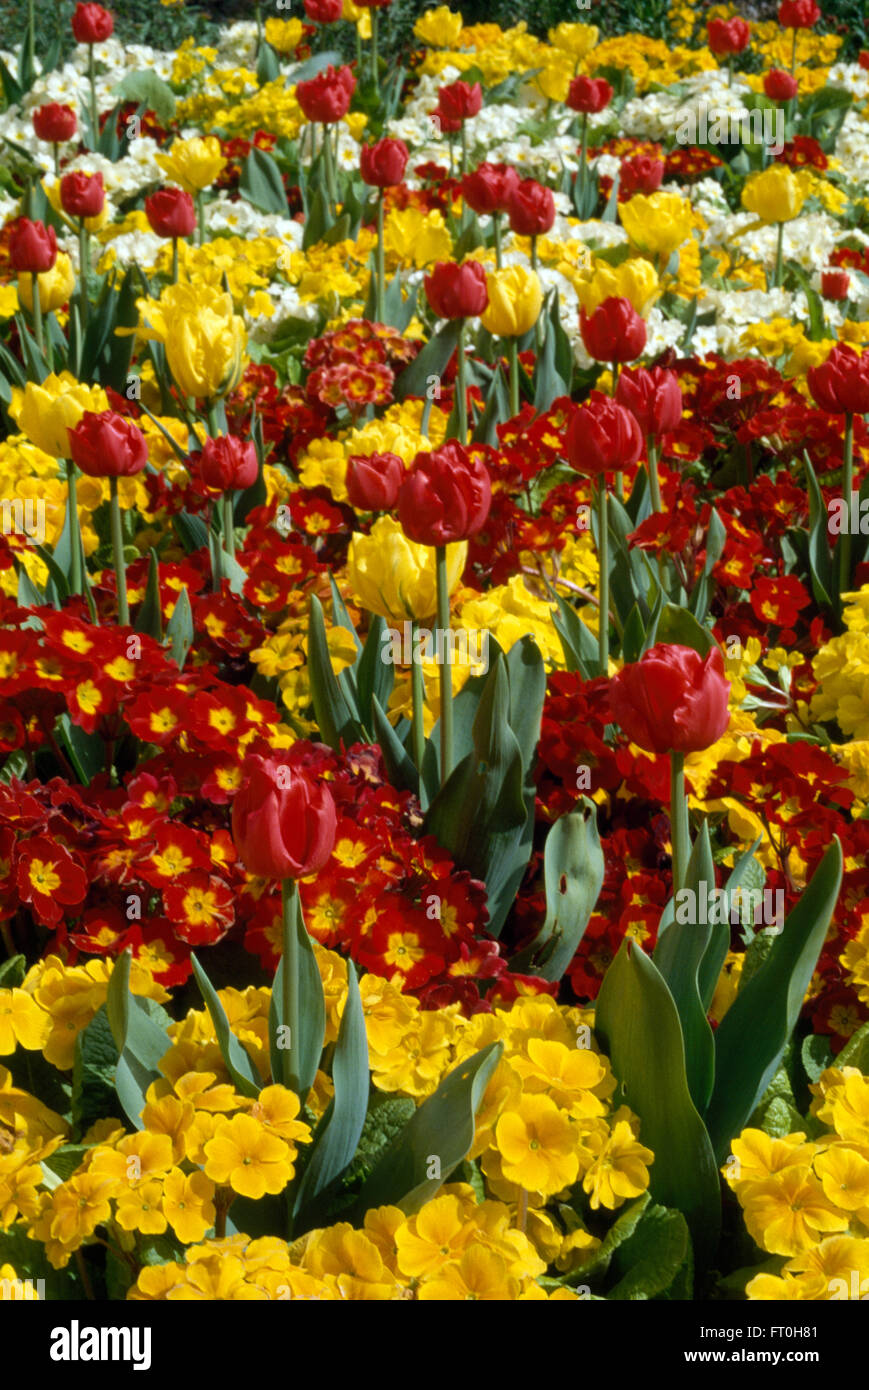 Close-up of yellow and red primroses planted with scarlet and yellow tulips Stock Photo